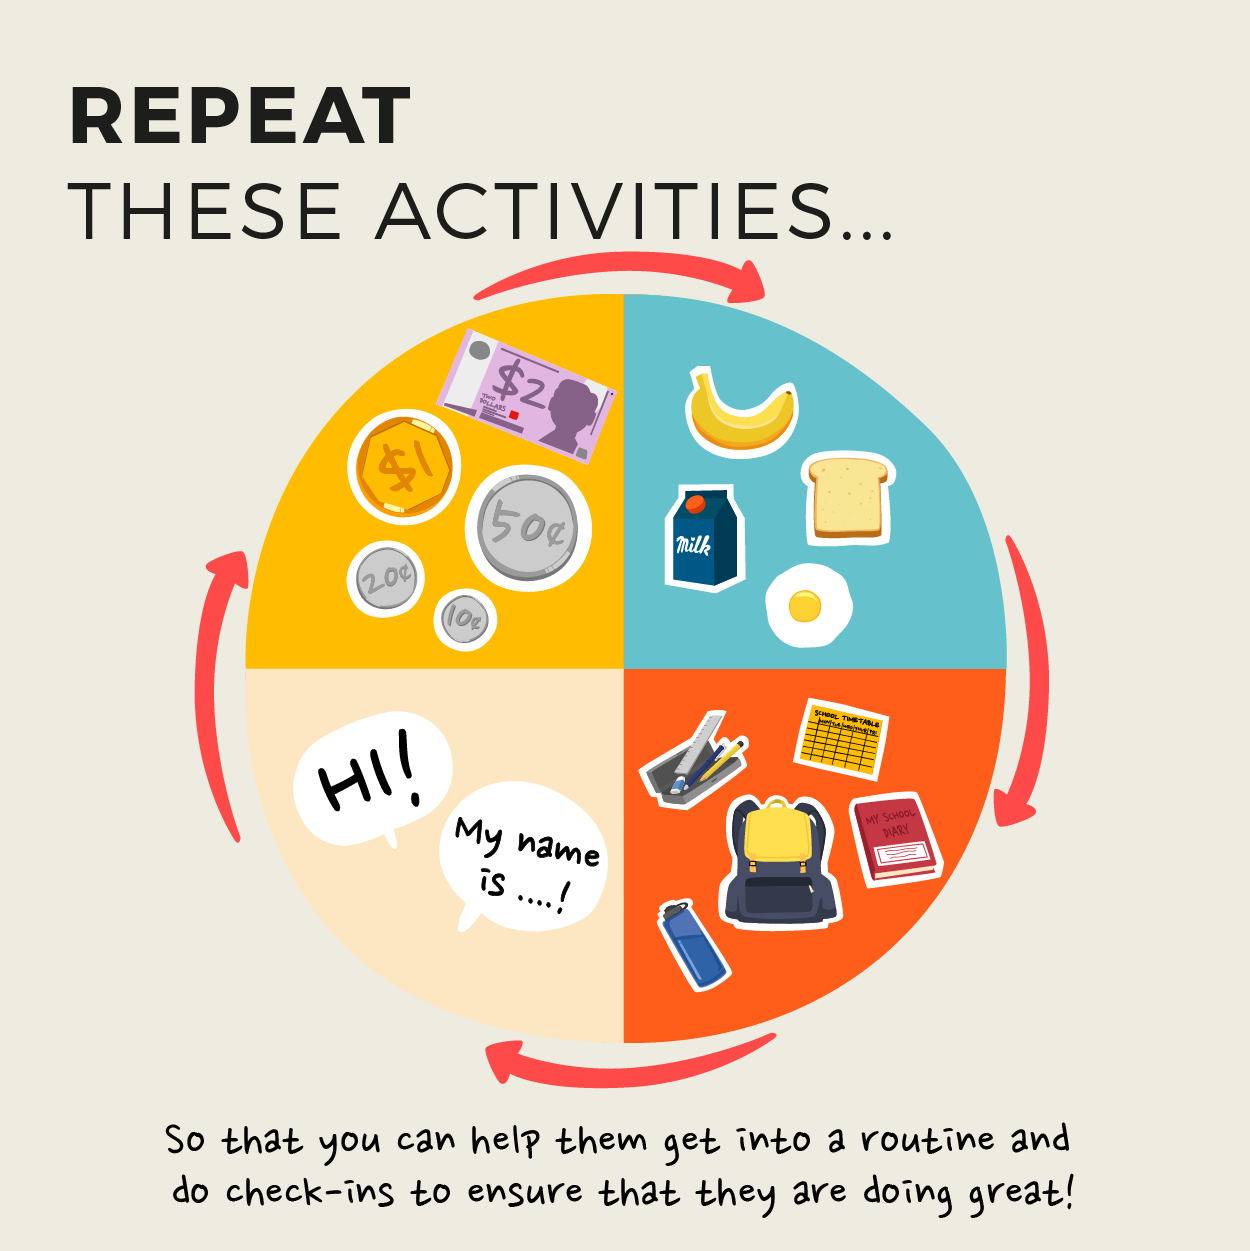 Repeat these activities 